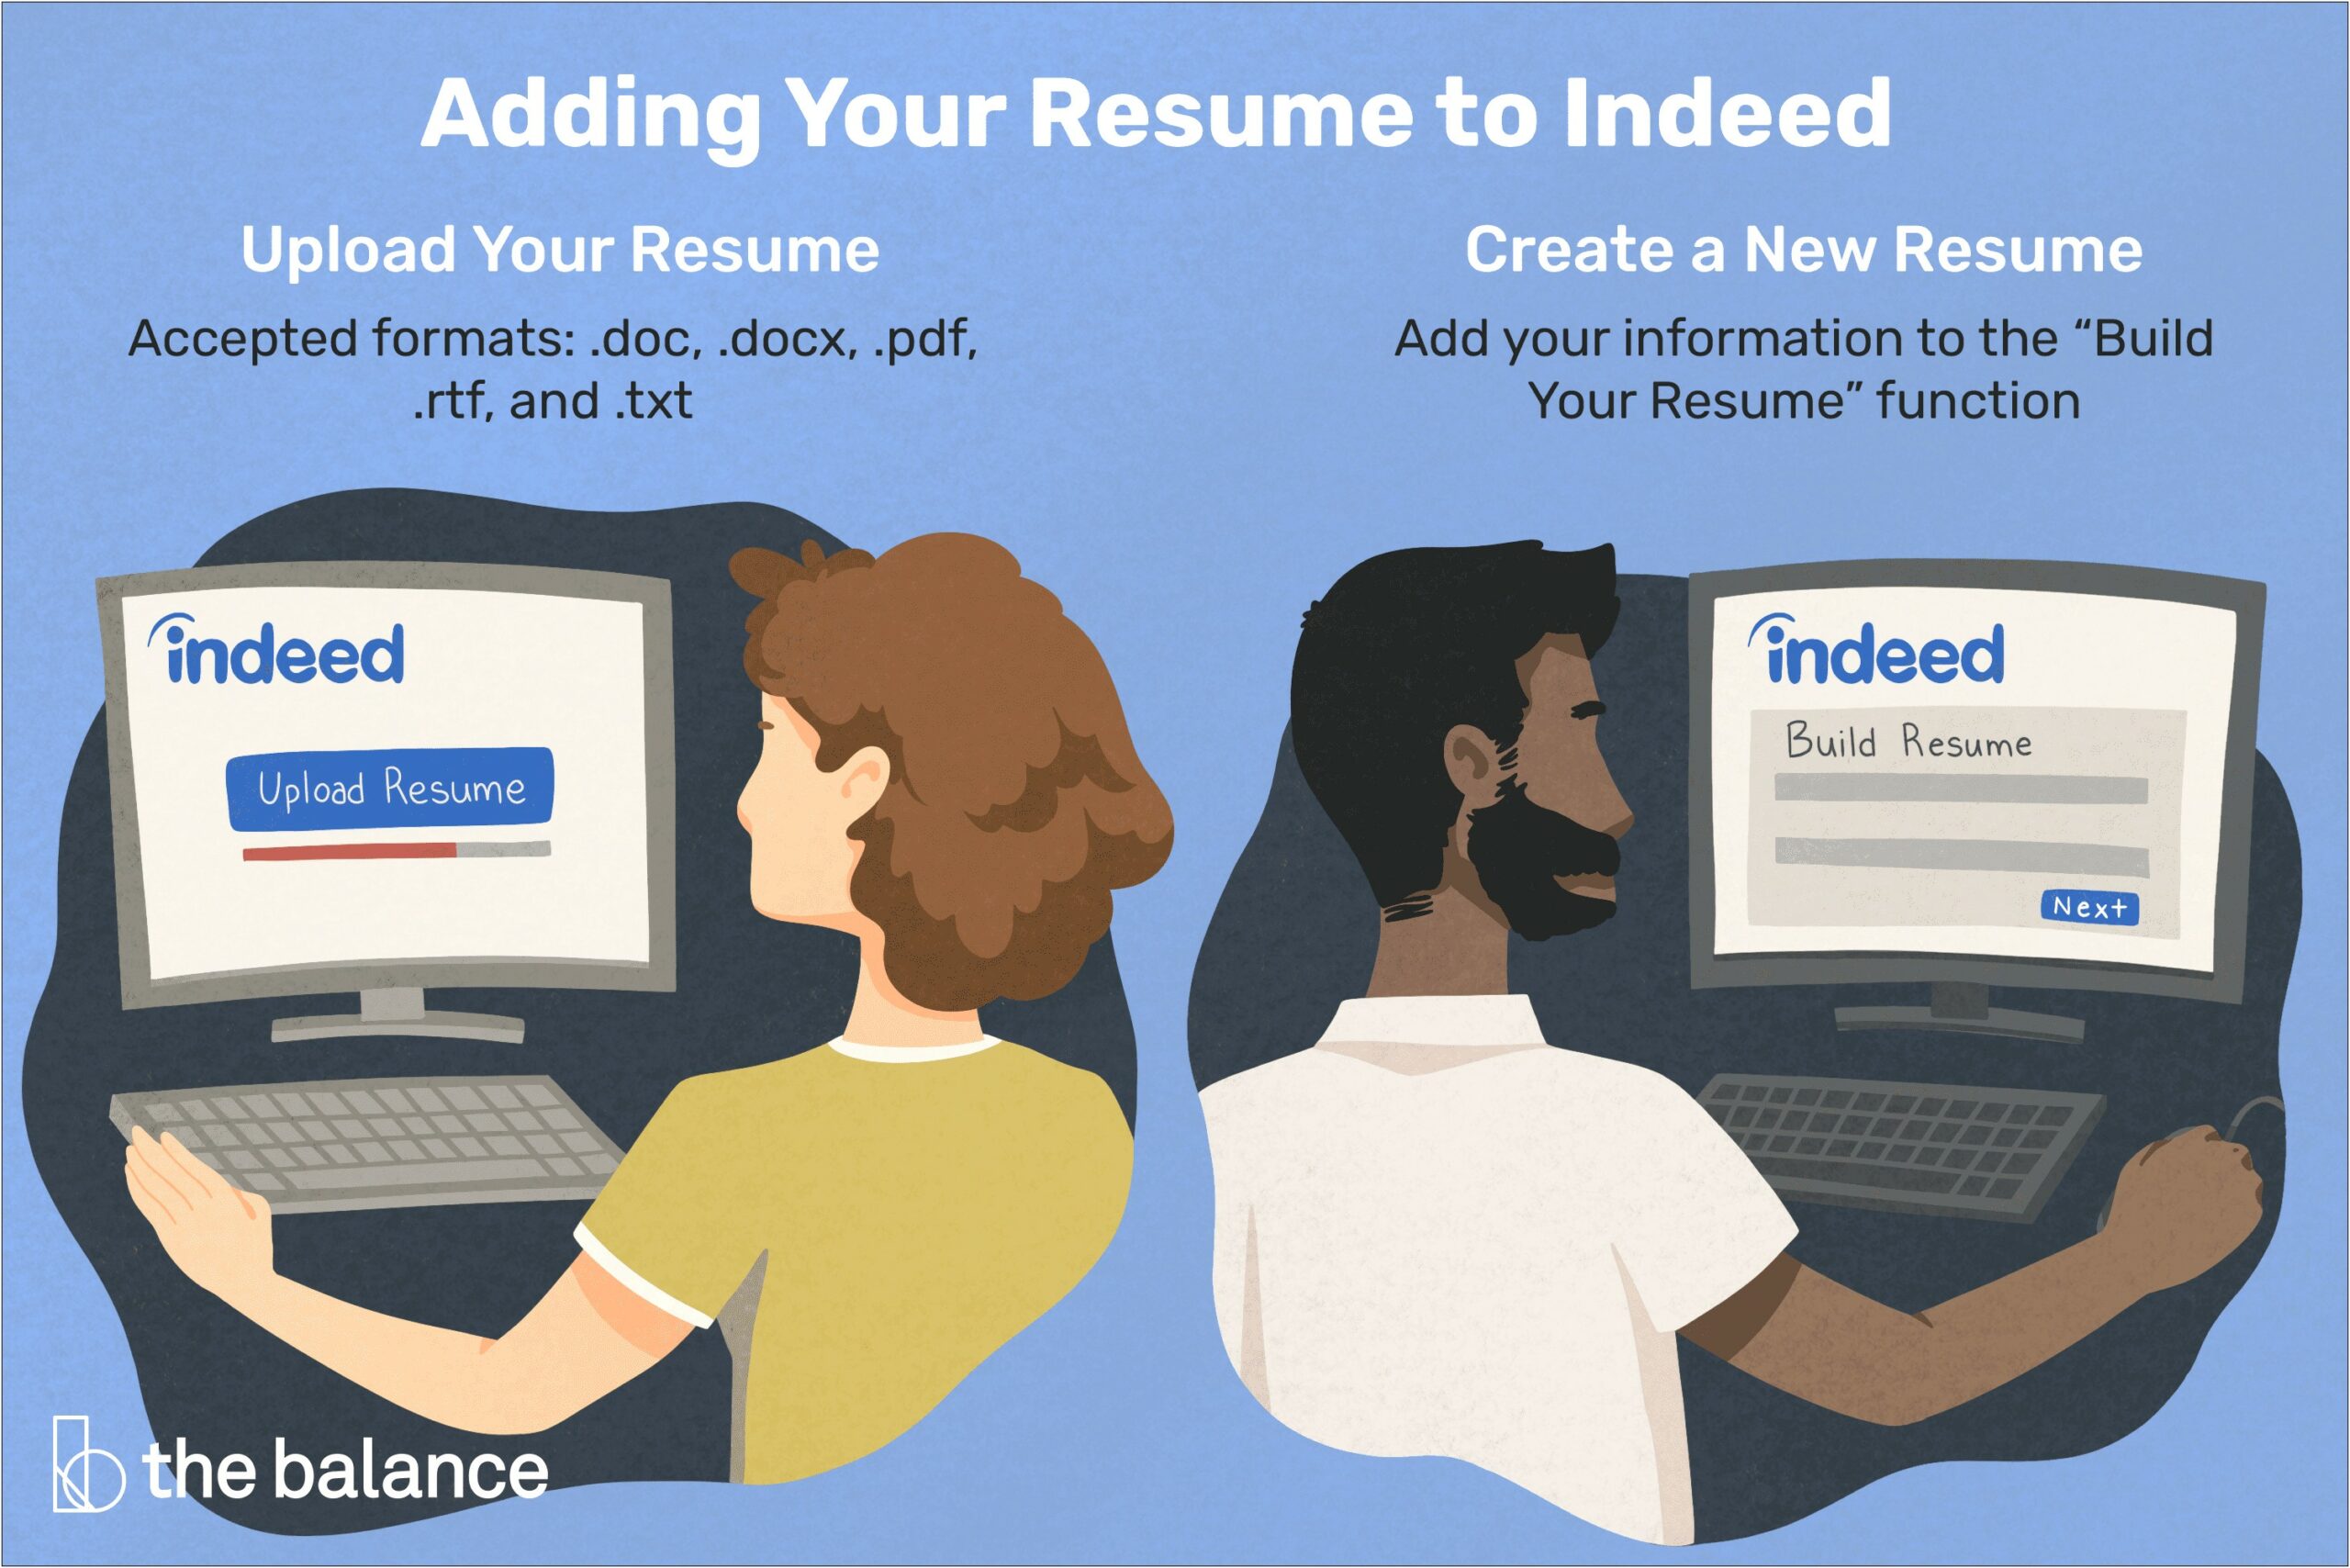 Where To Post Your Resume For Jobs